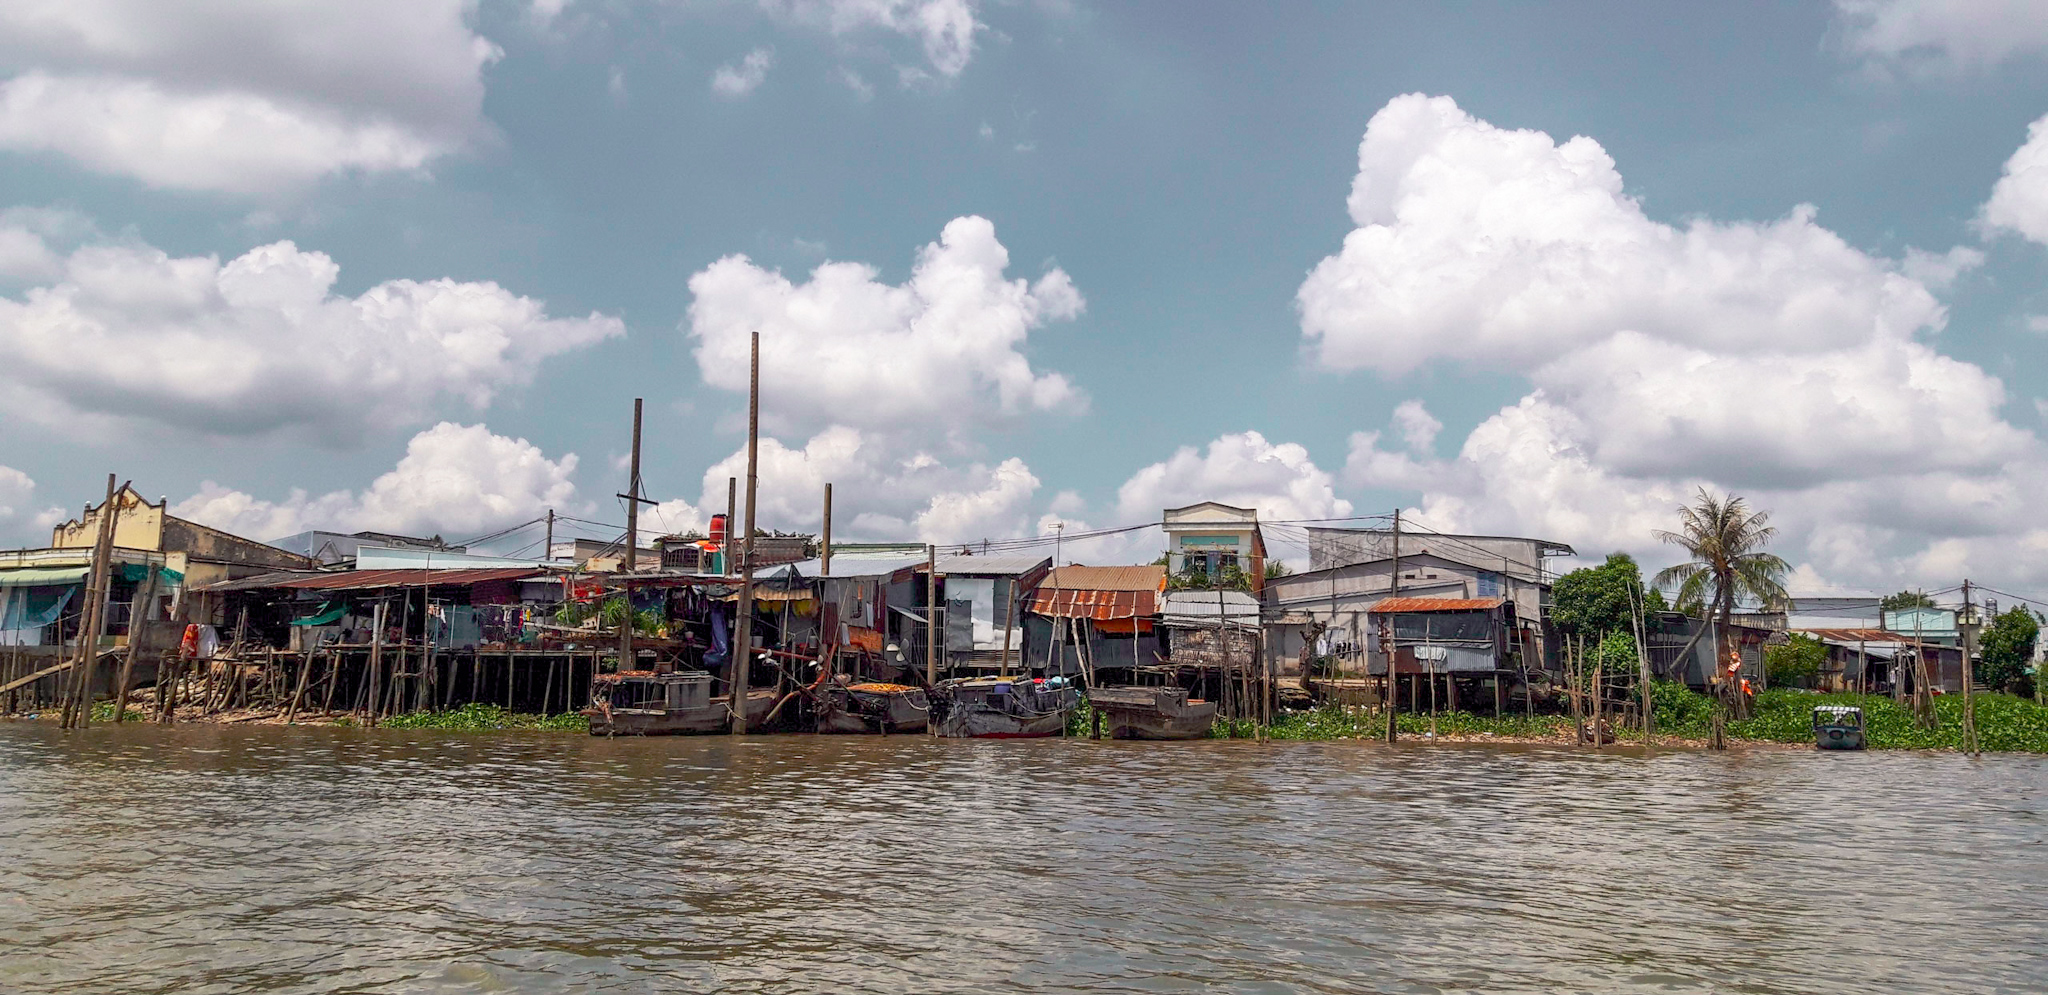 Can Tho is the city where you can visit the Mekong delta and where most people go just because of it. The truth is that the city itself isn't that big or has much more to offer to visitors.